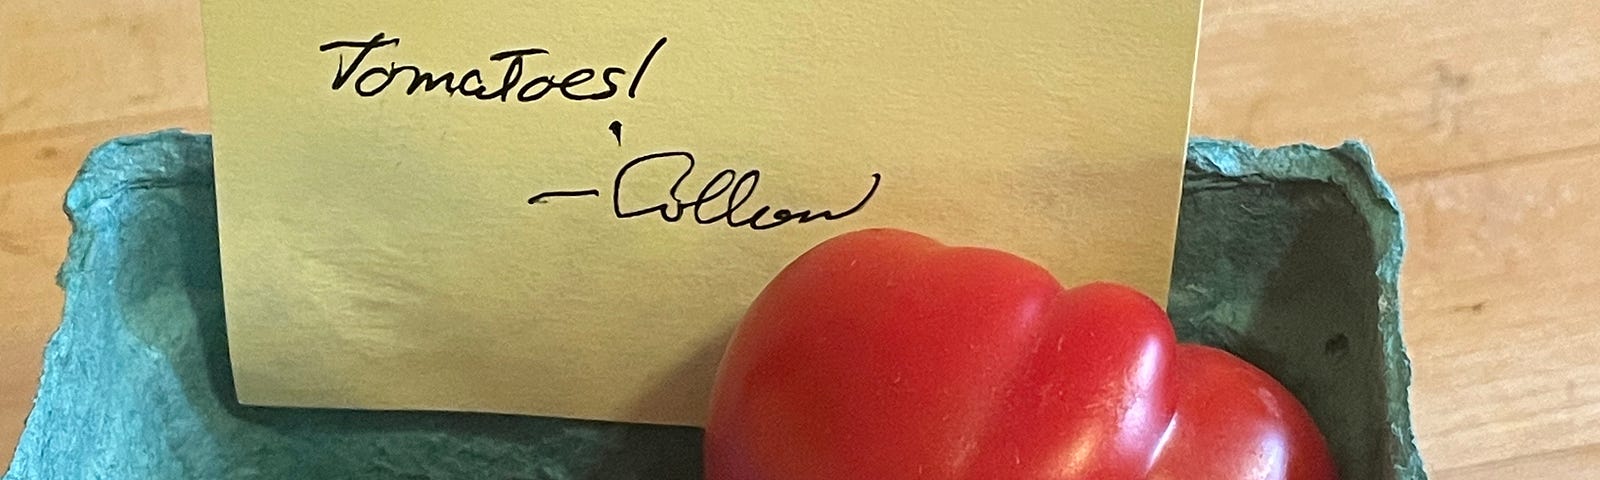 container of tomatoes with note “Enjoy. We have an abundance of tomatoes — Colleen”